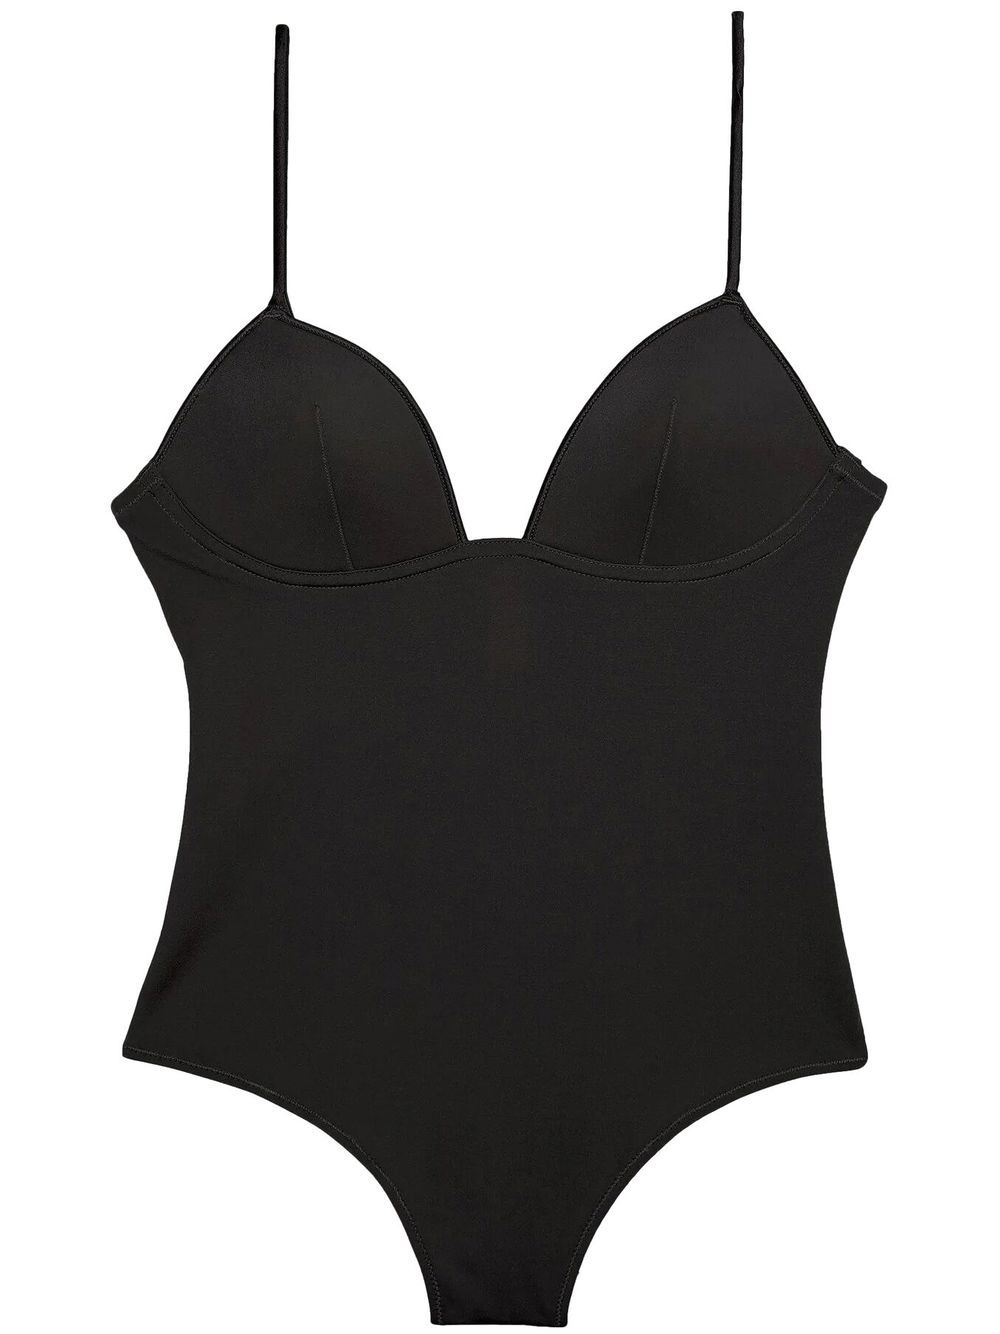 cupped nonwire bodysuit